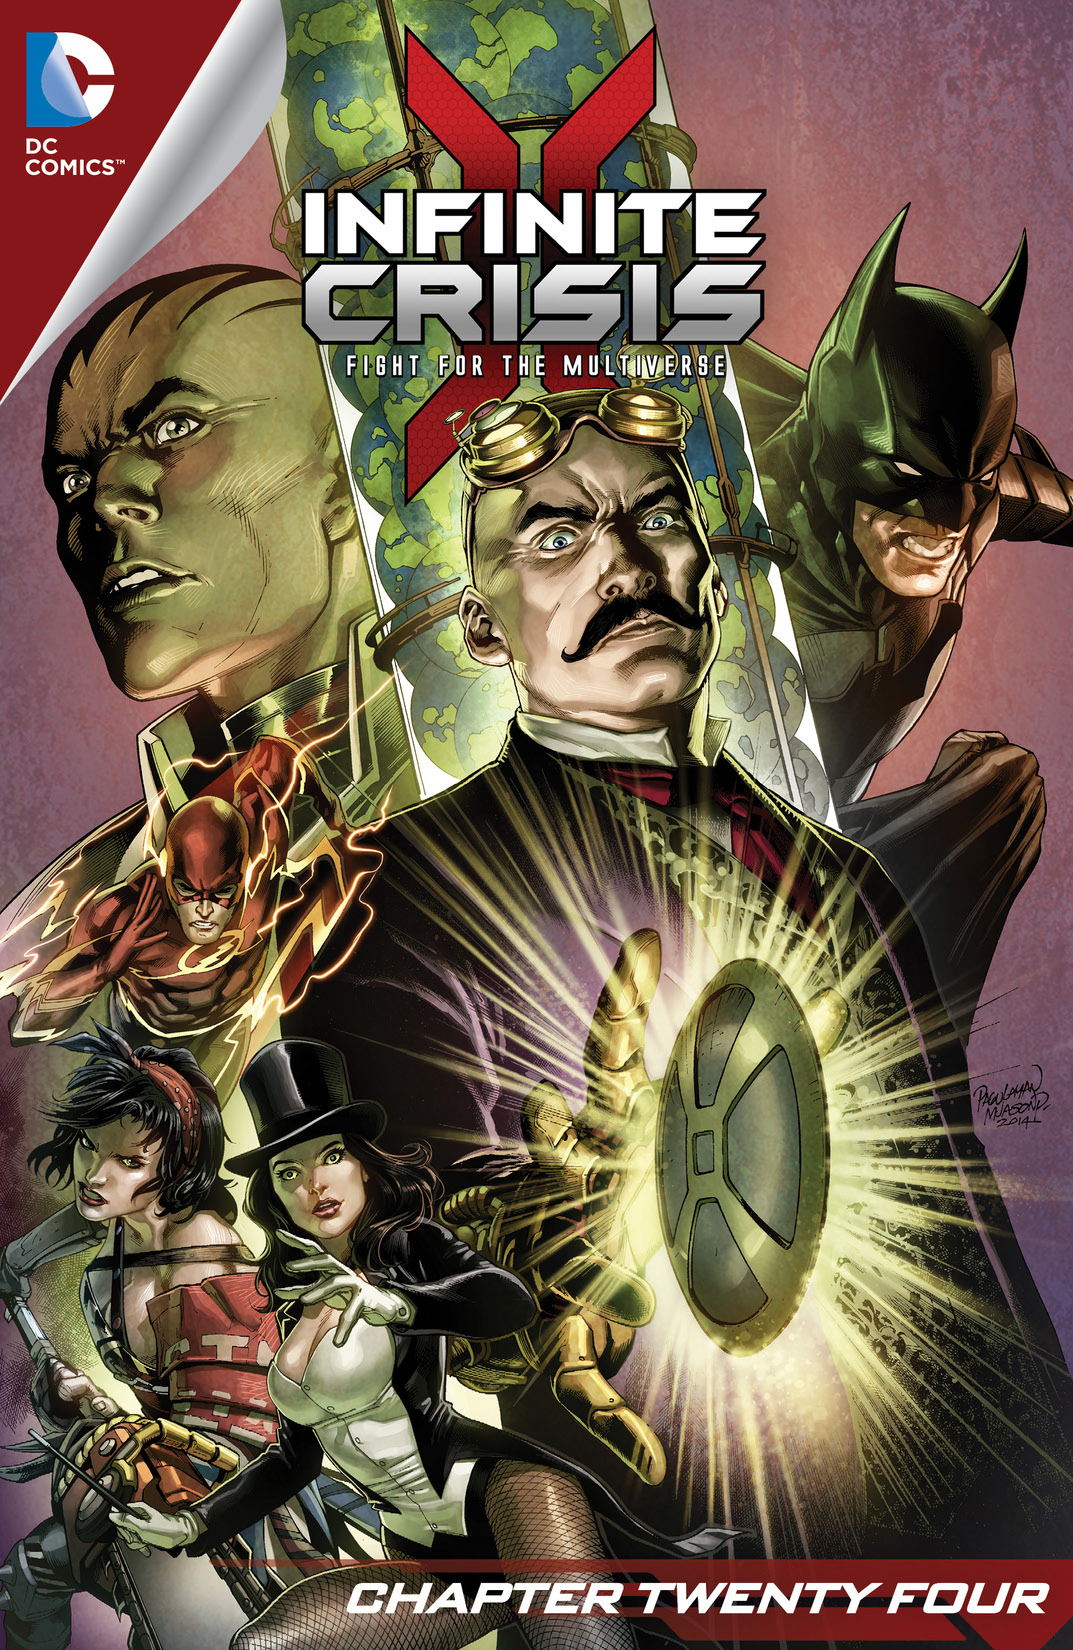 Infinite Crisis: Fight for the Multiverse #24 preview images